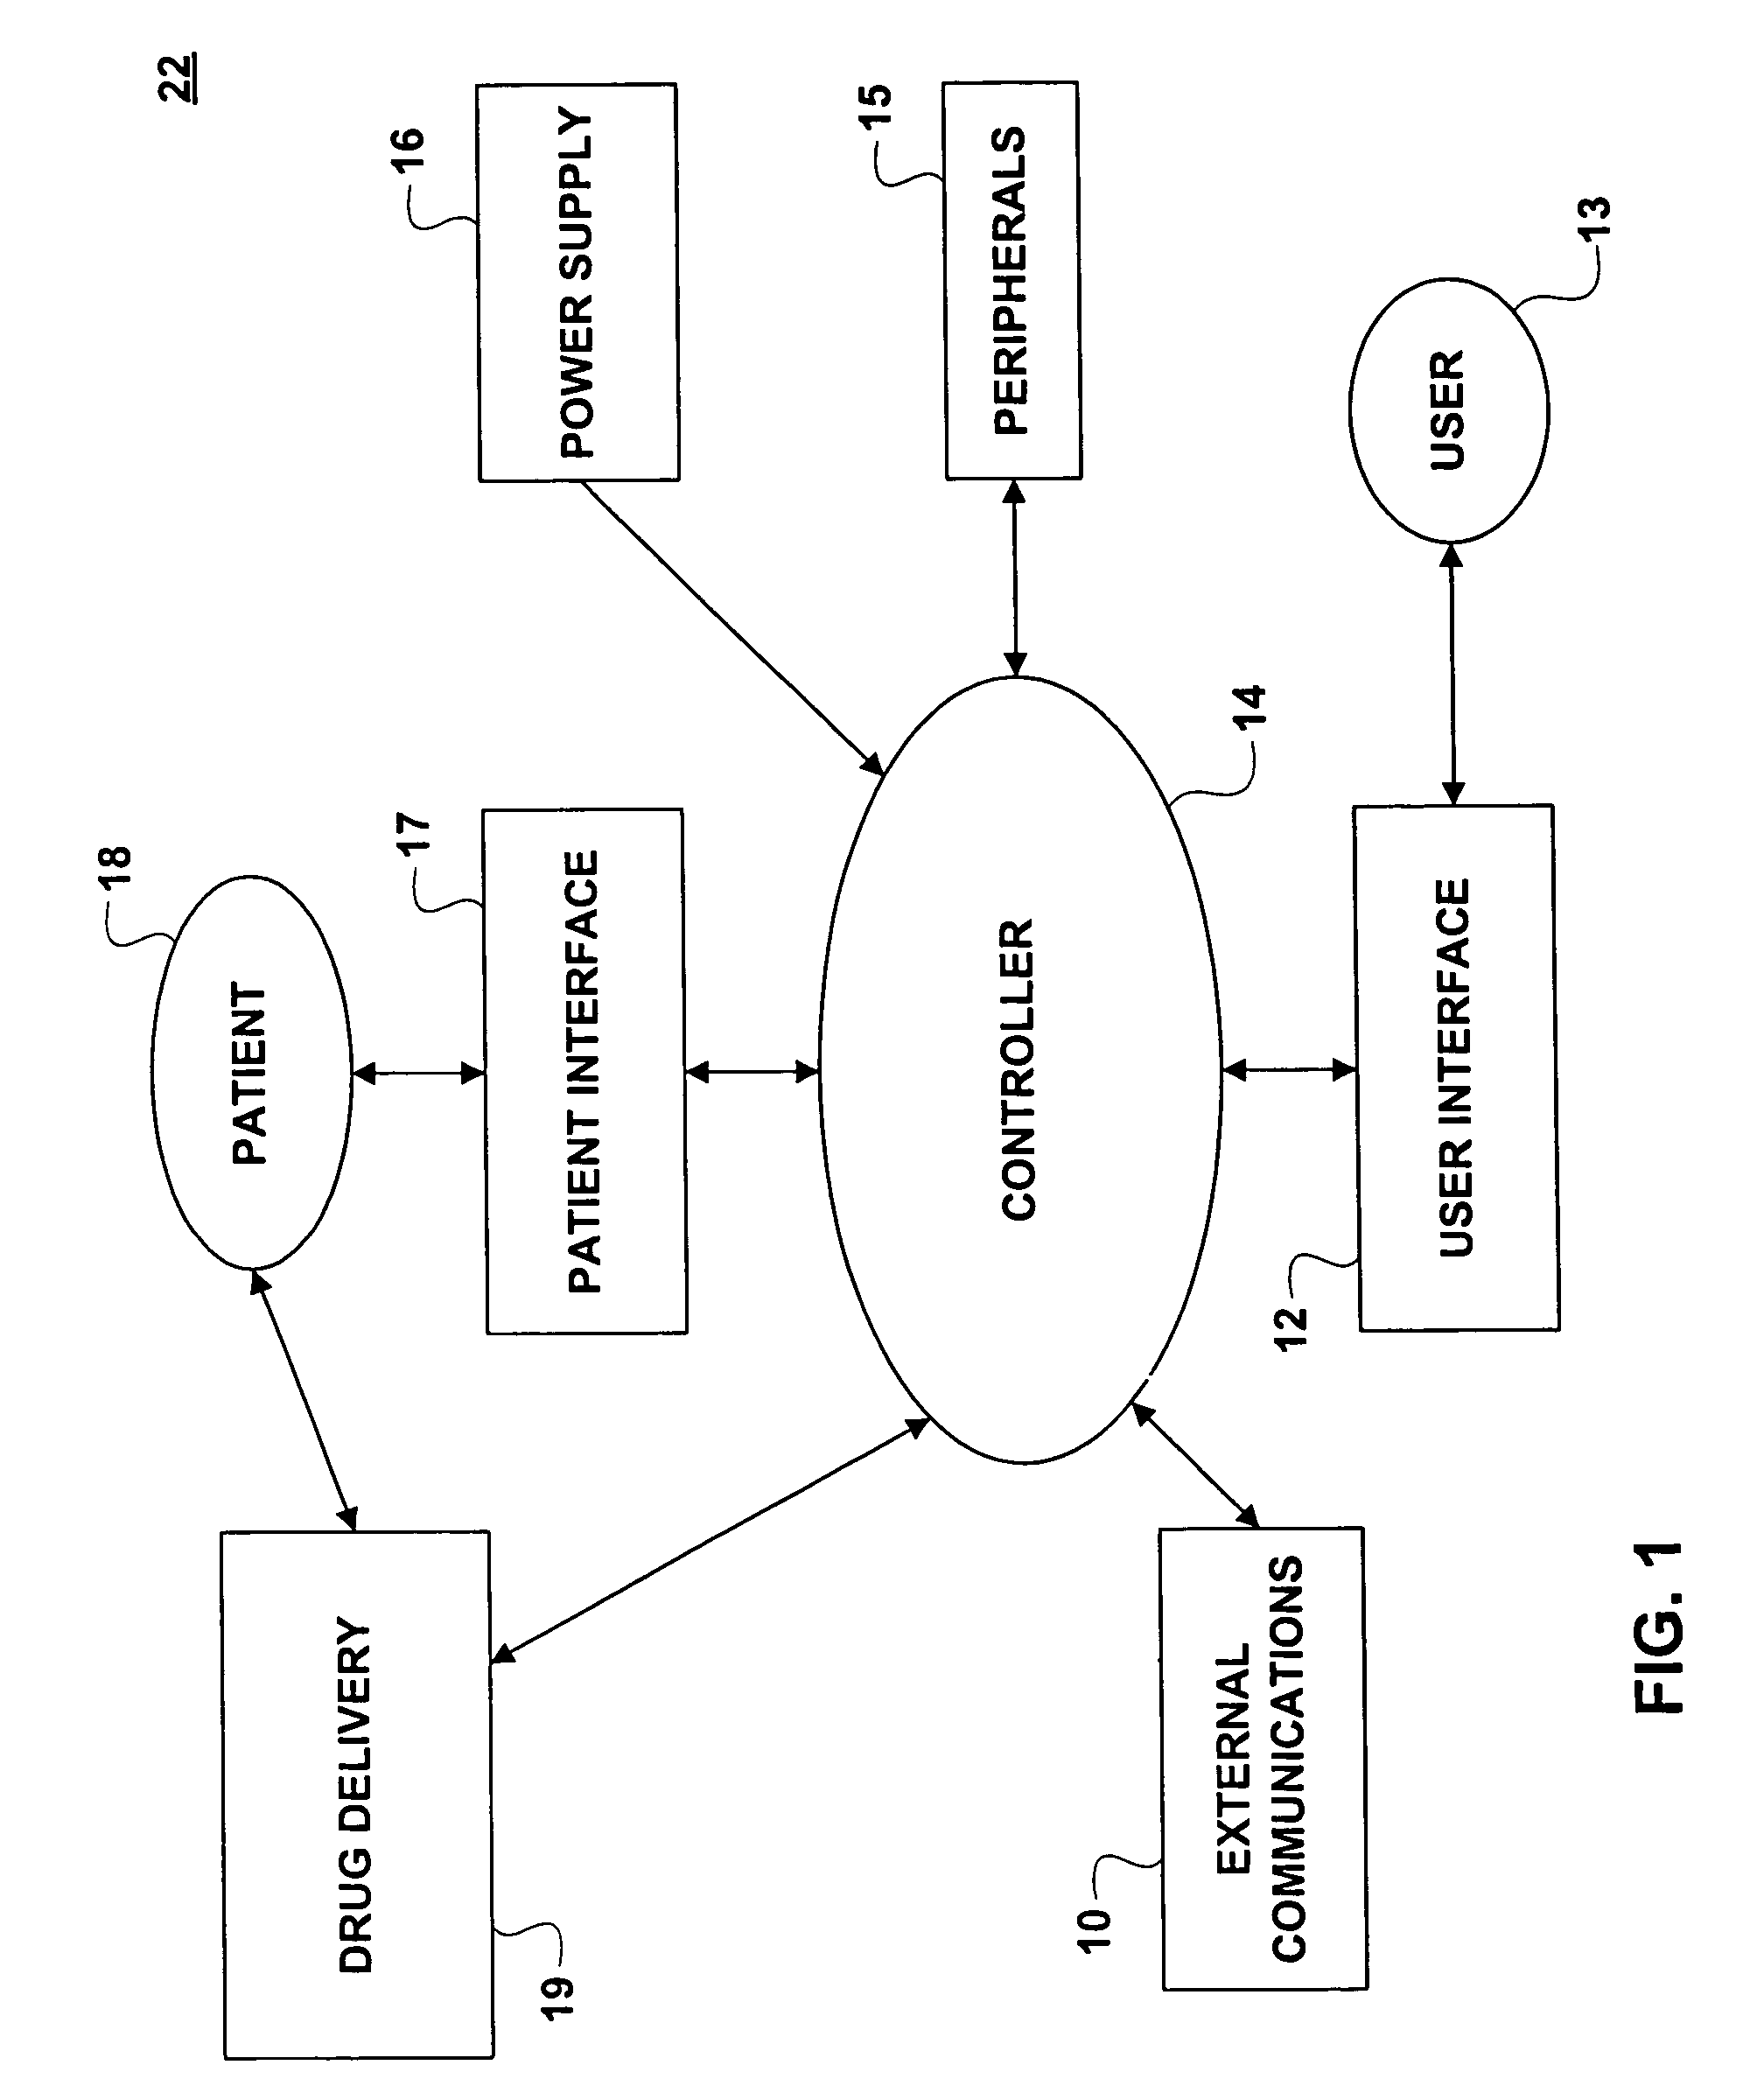 Systems and methods for providing trend analysis in a sedation and analgesia system